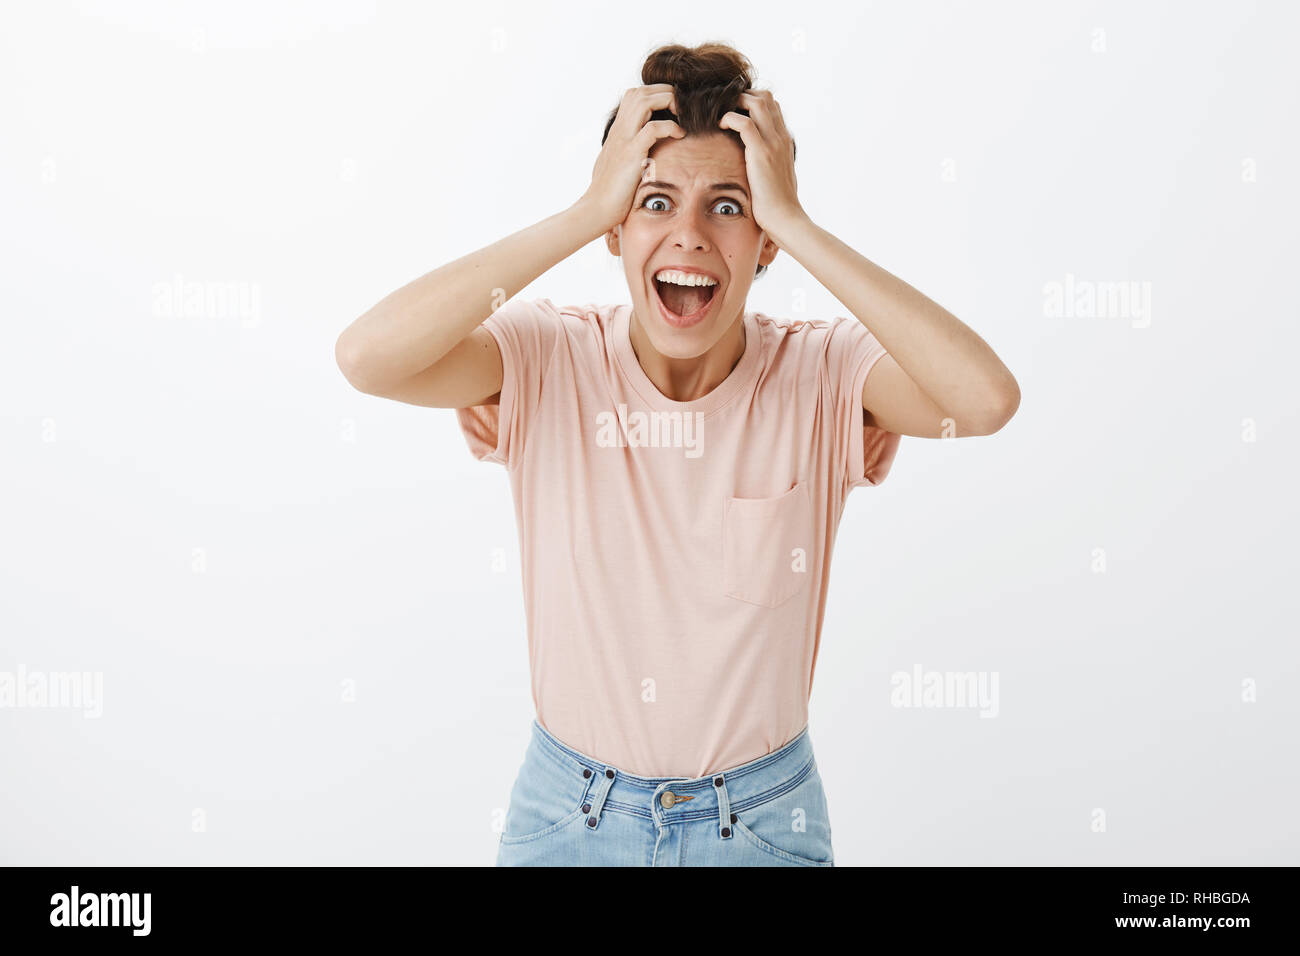 Freaked out concerned and shouting young insane girlfriend with messy bun holding hand on head yelling at camera with popped eyes losing temper as Stock Photo